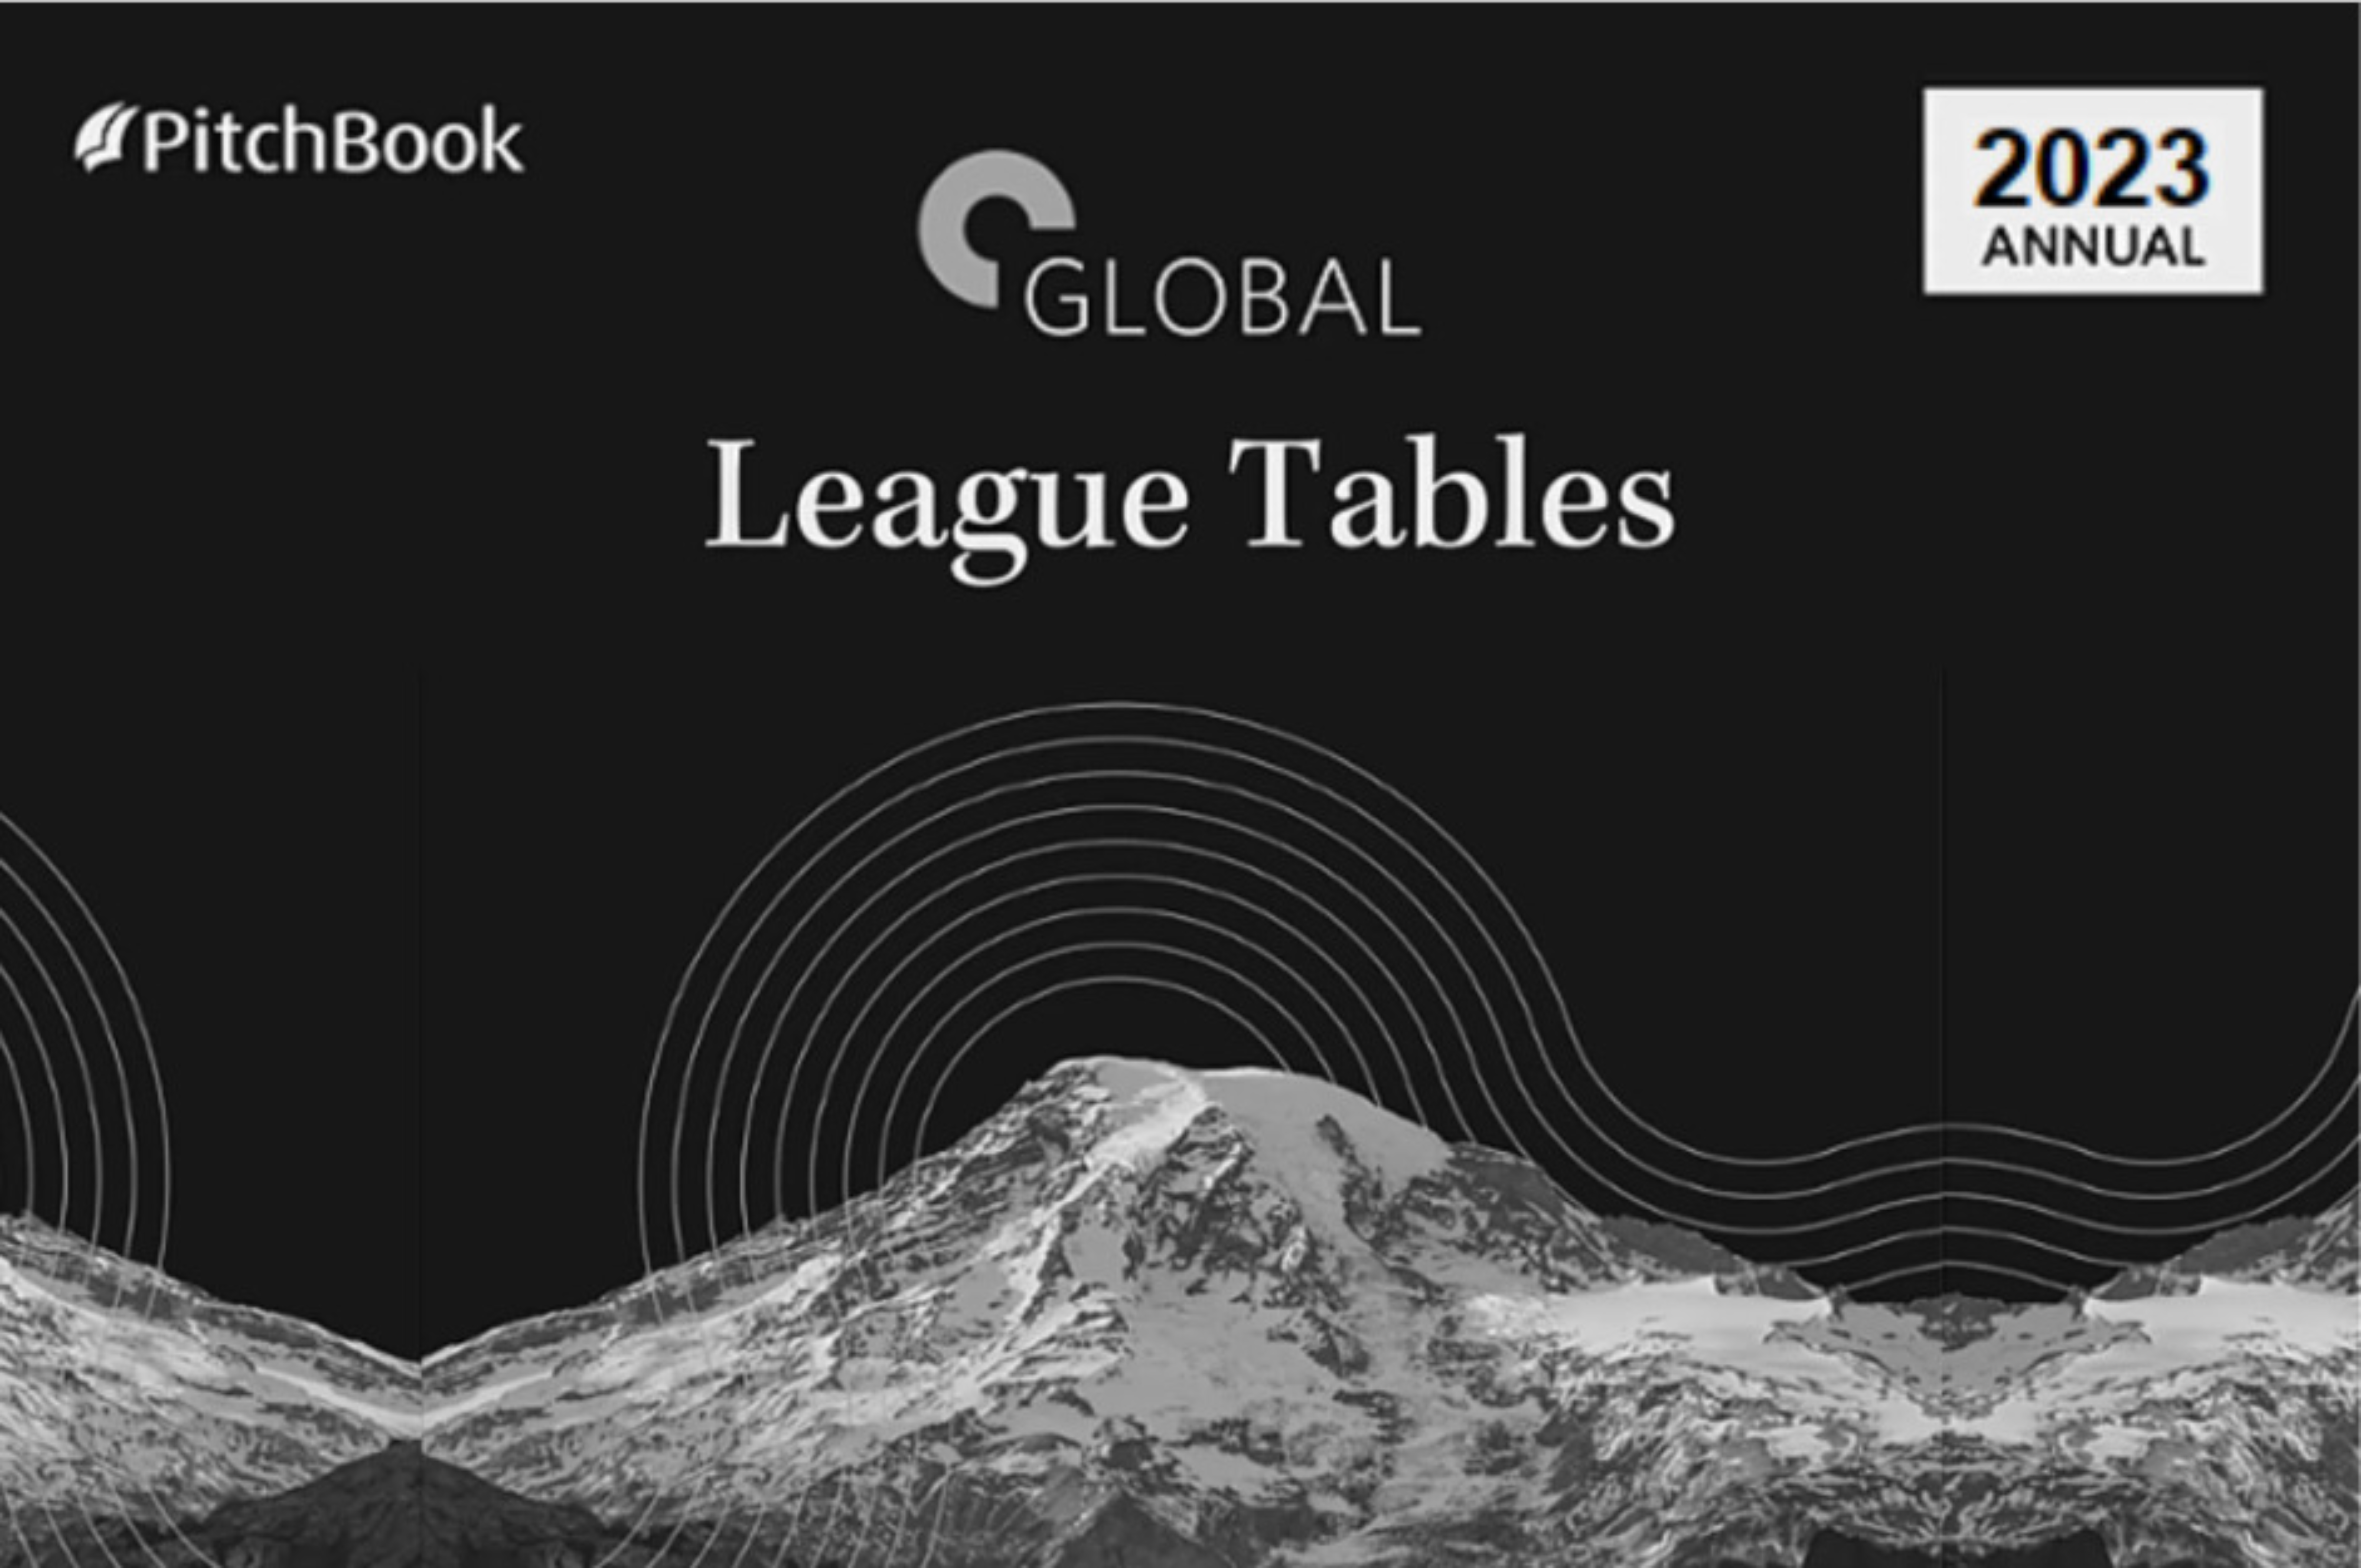 HLaw ranks in Pitchbook’s 2023 global league tables